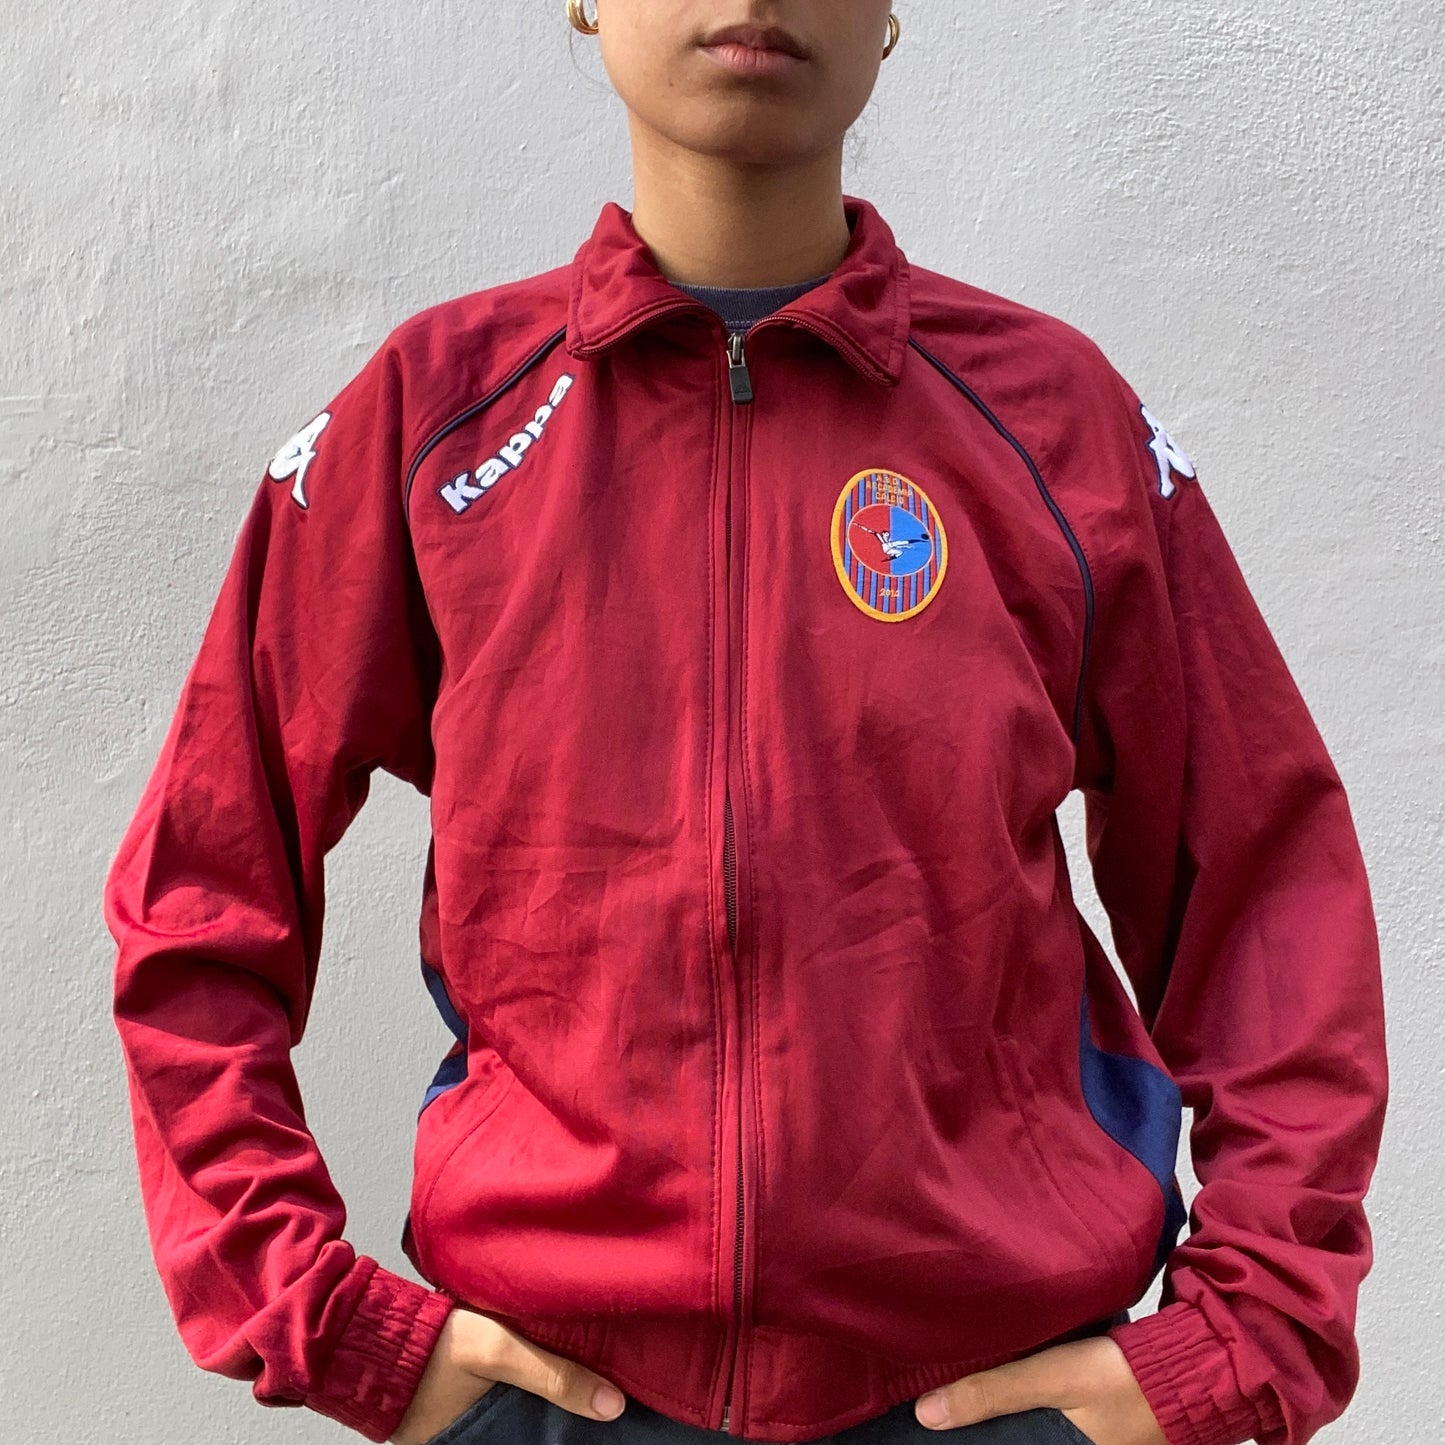 Red Calcio Kappa Track Suit front